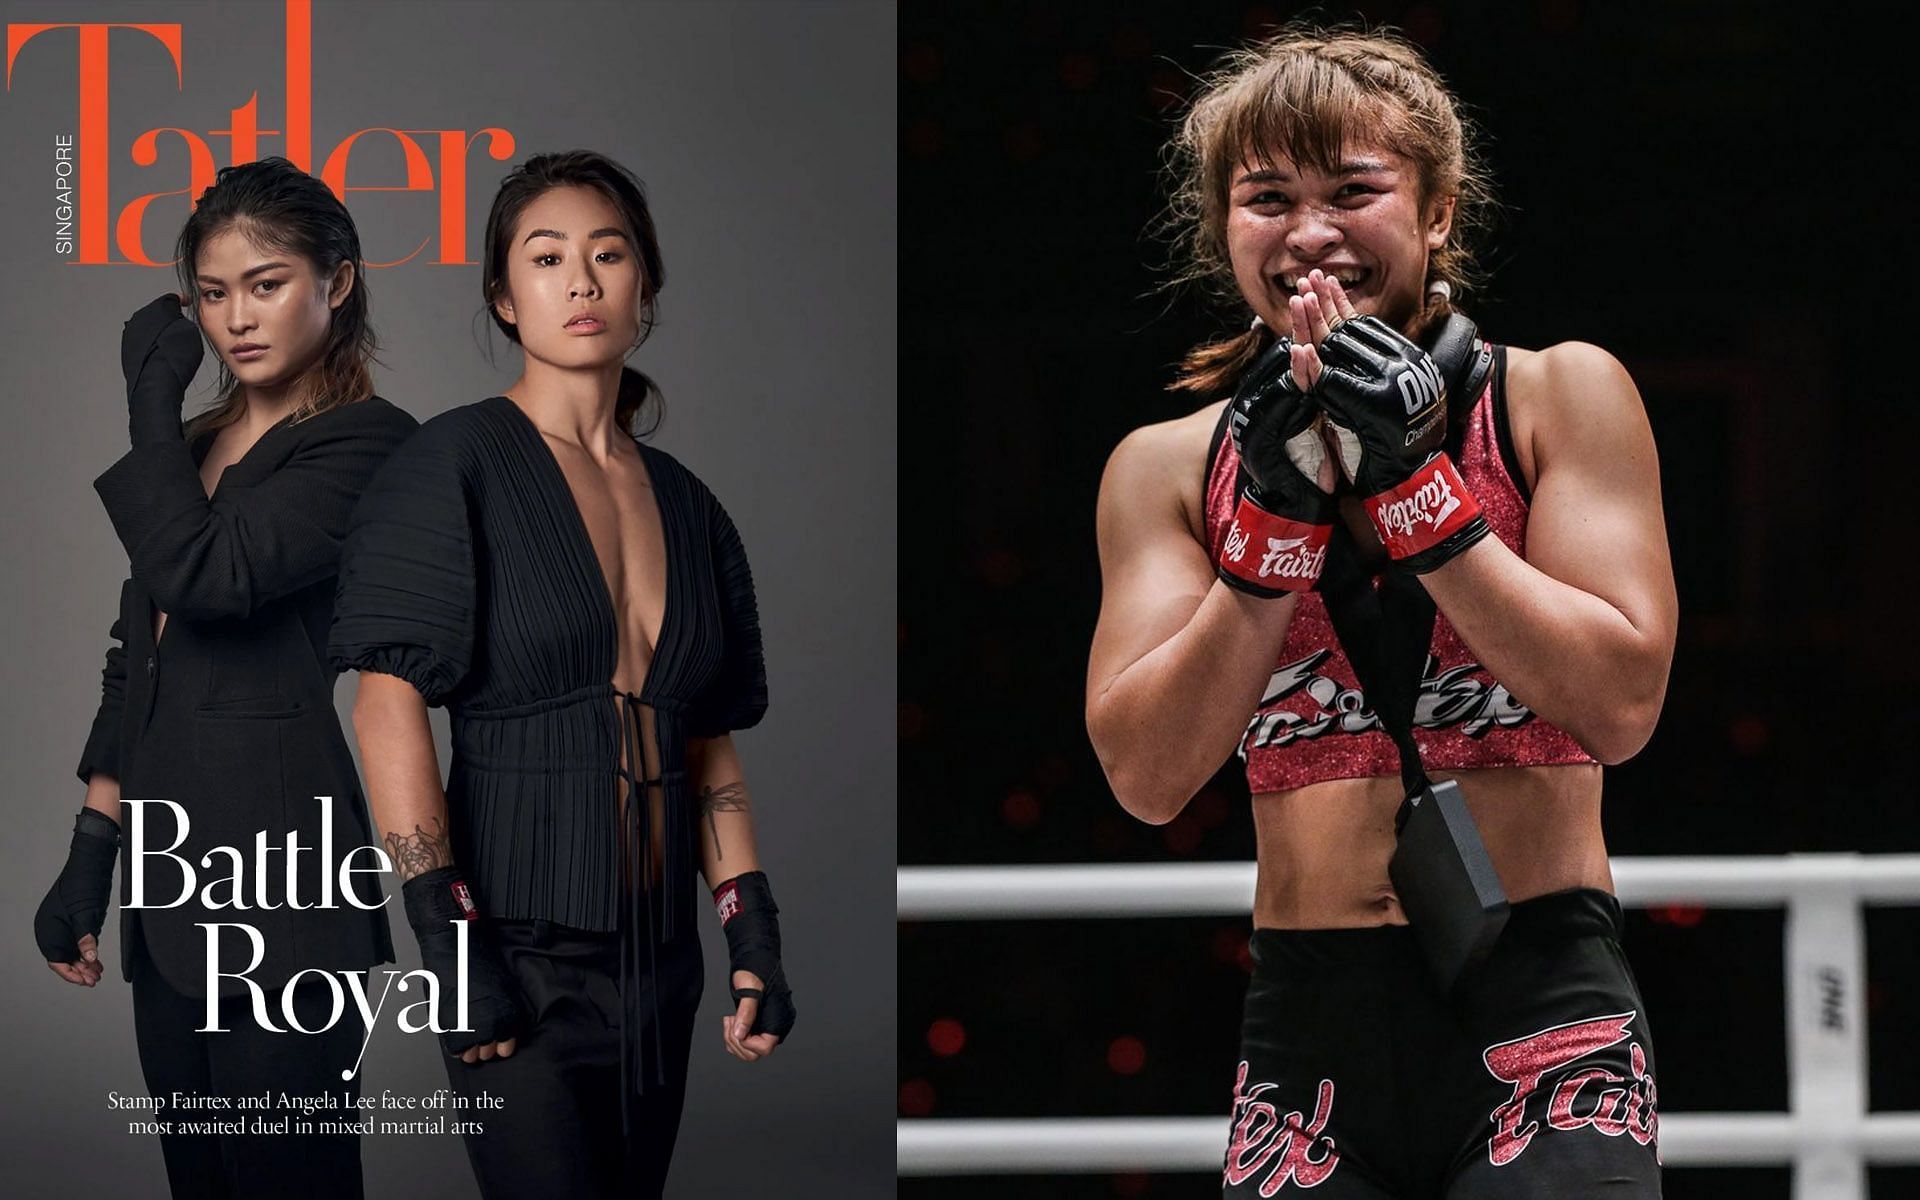 Stamp Fairtex (right) gushes over her photoshoot experience. [Photos: Tatler Singapore/ONE Championship]